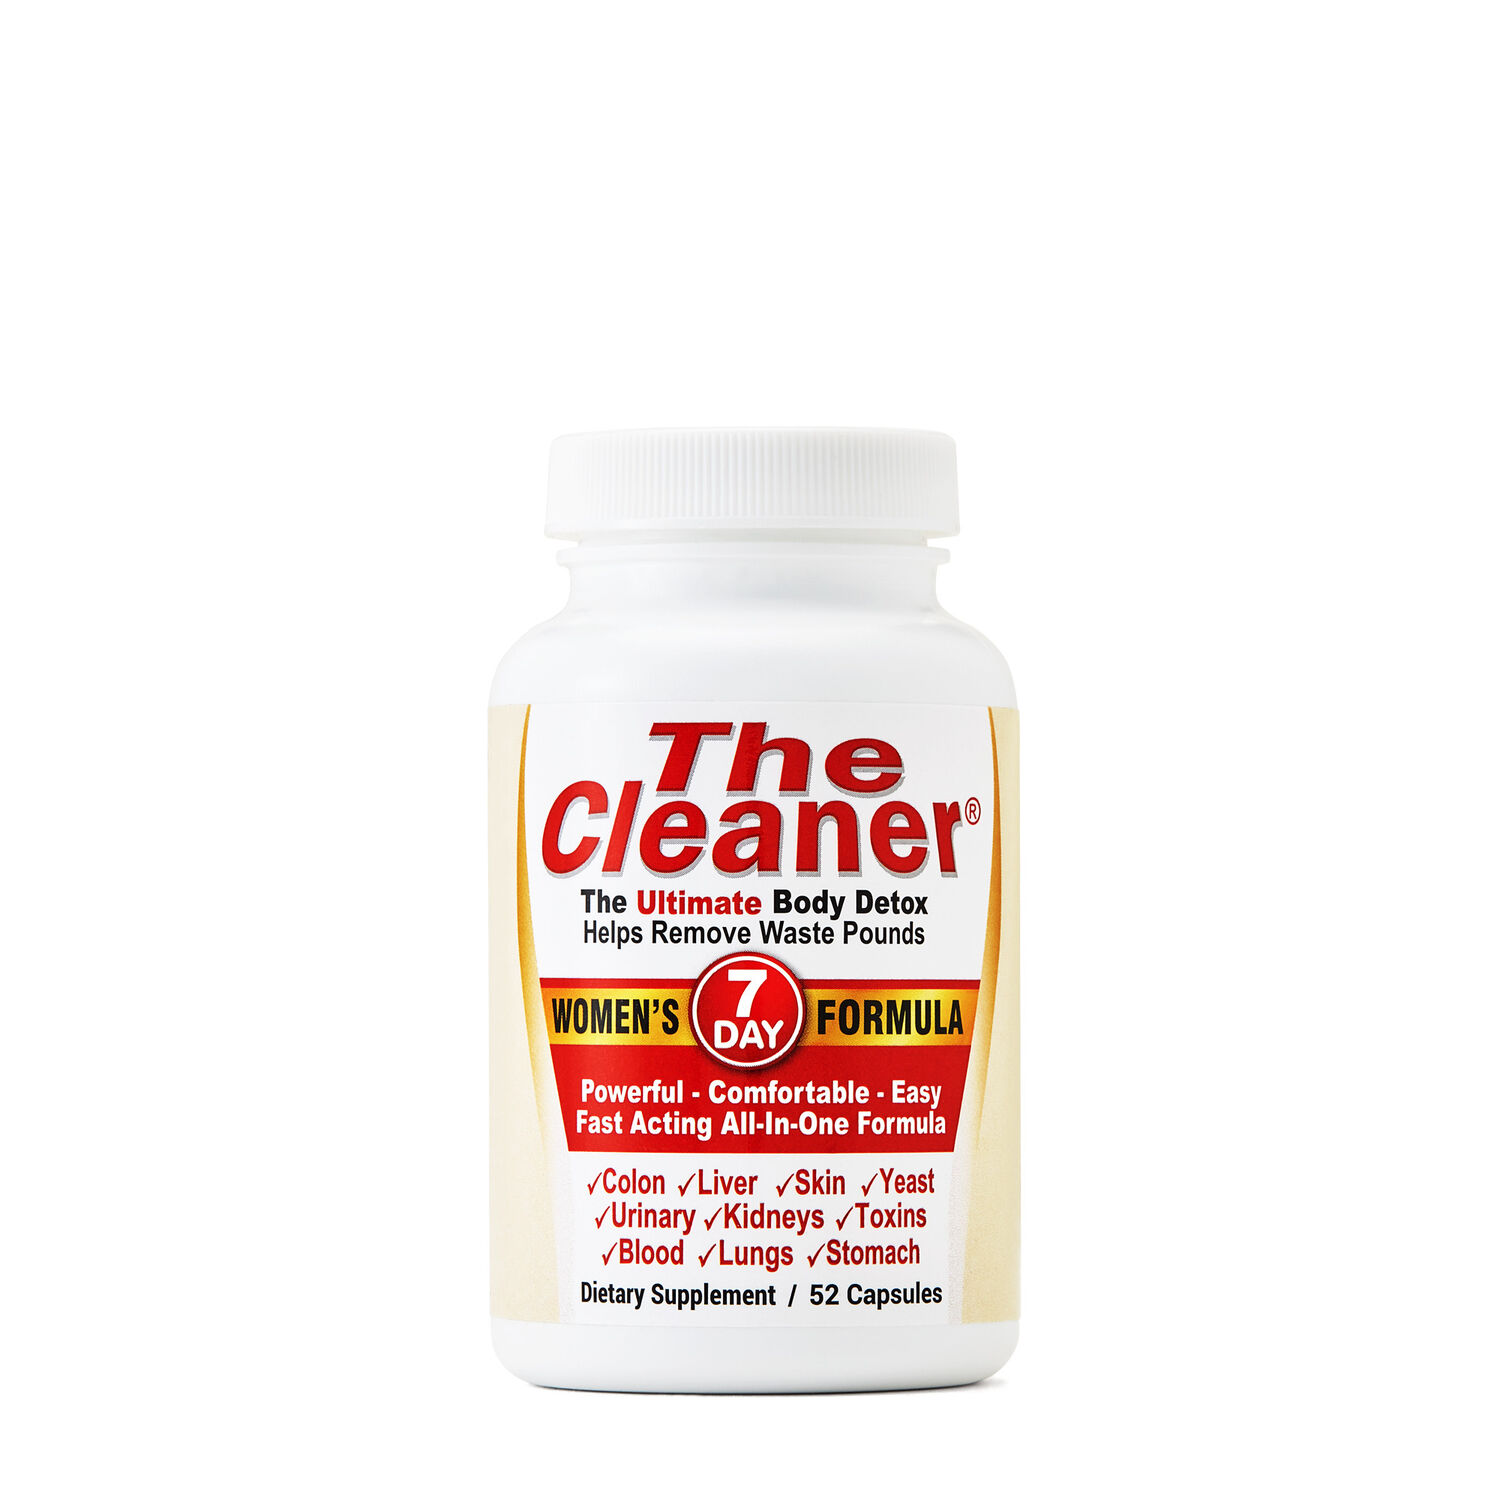 The Cleaner 14 Day Men's Formula - 104 Capsules - Century Systems